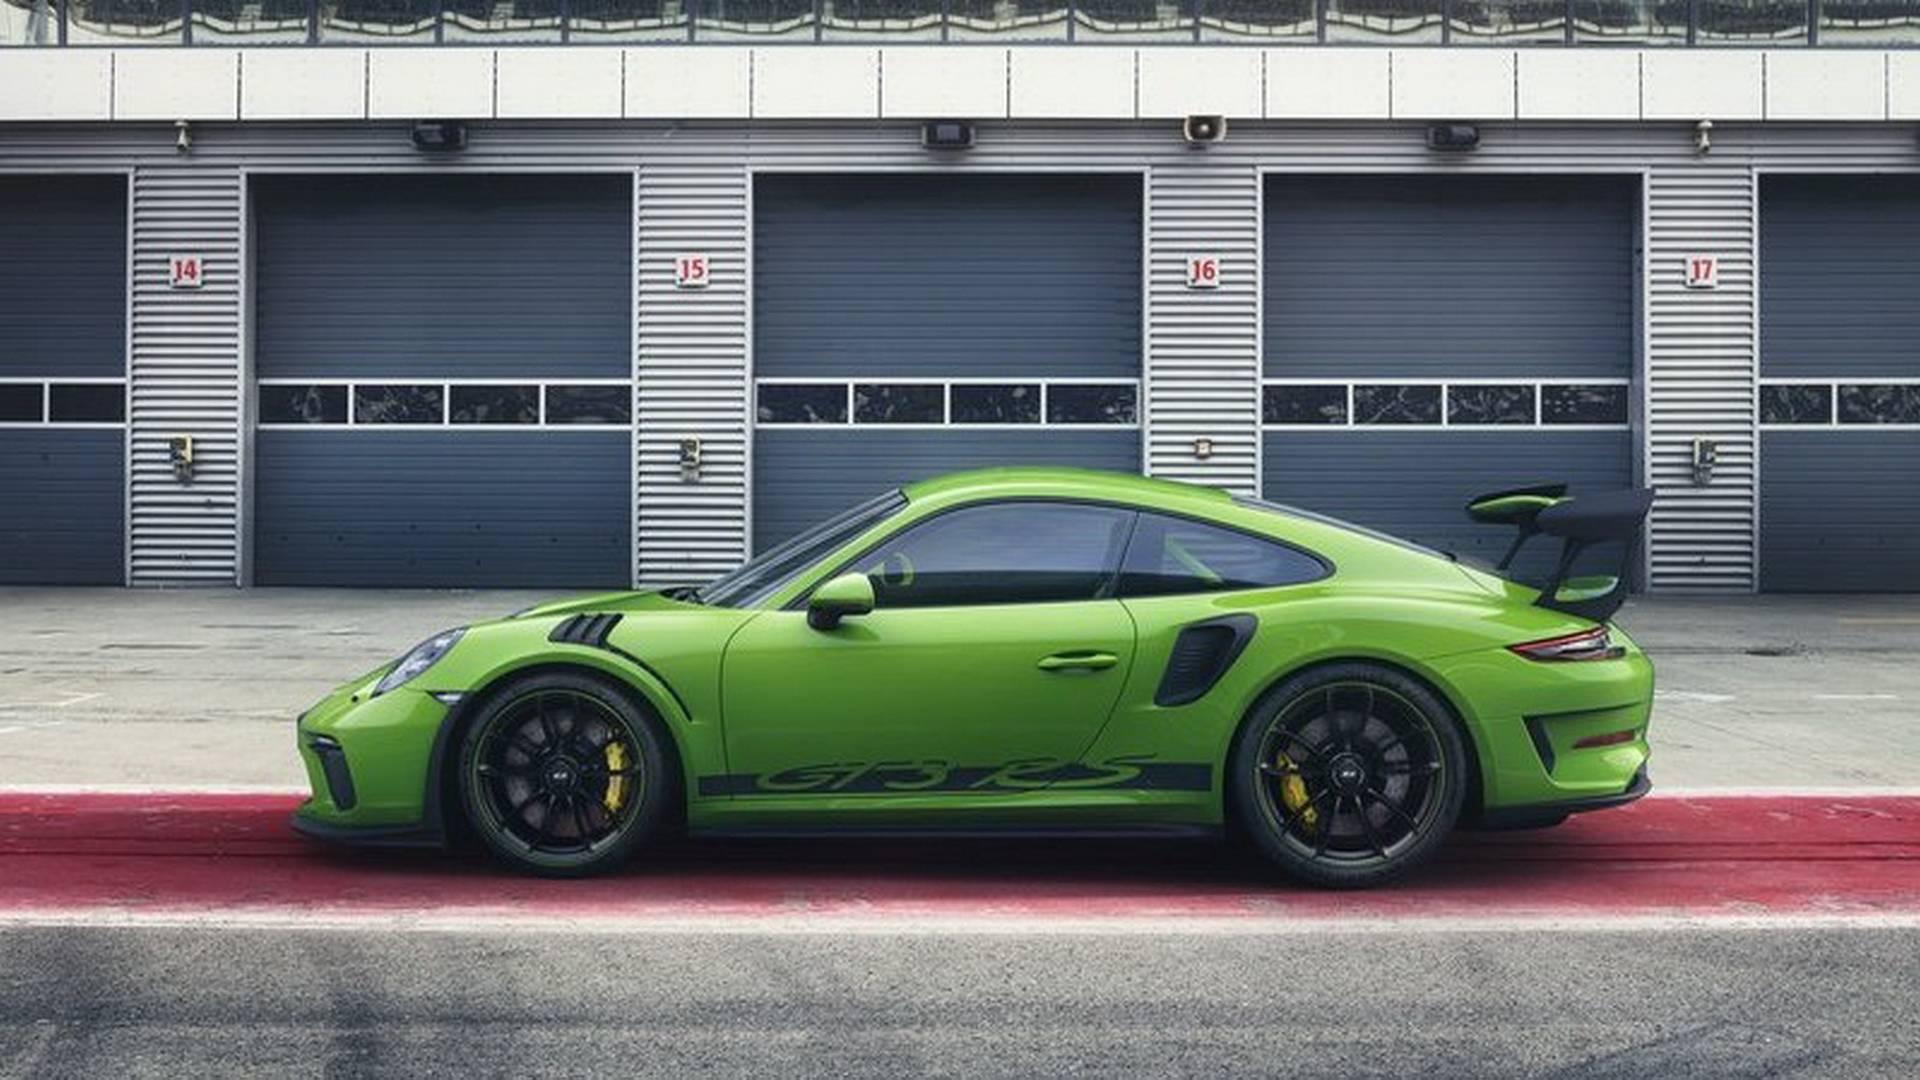 911 GT3 RS on road Price  Porsche 911 GT3 RS Features & Specs